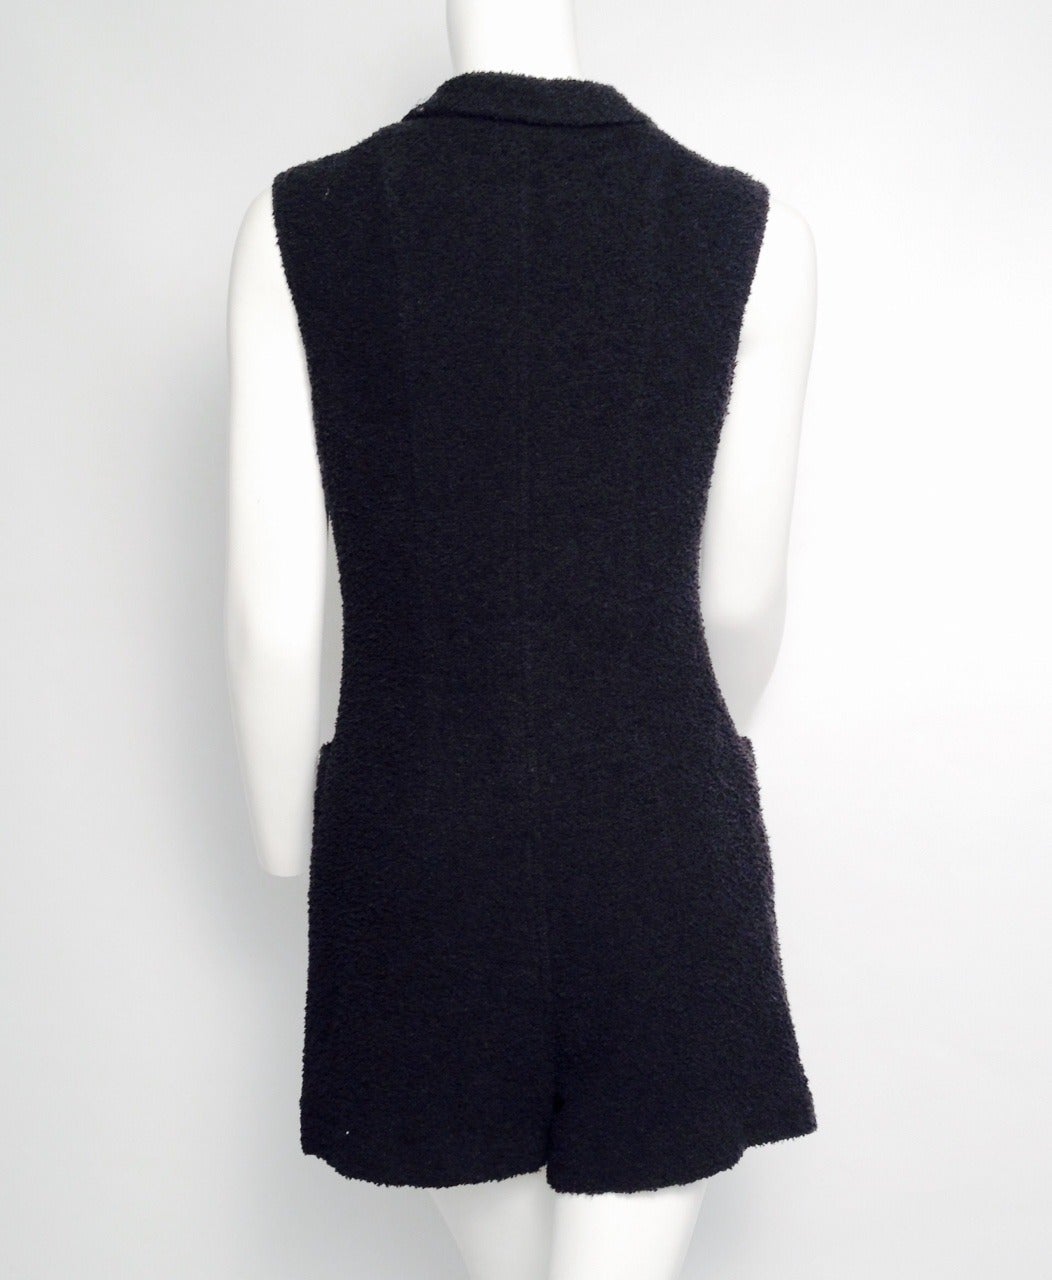 Chanel 1995 Navy Terry Cloth Sleeveless Romper was made for 